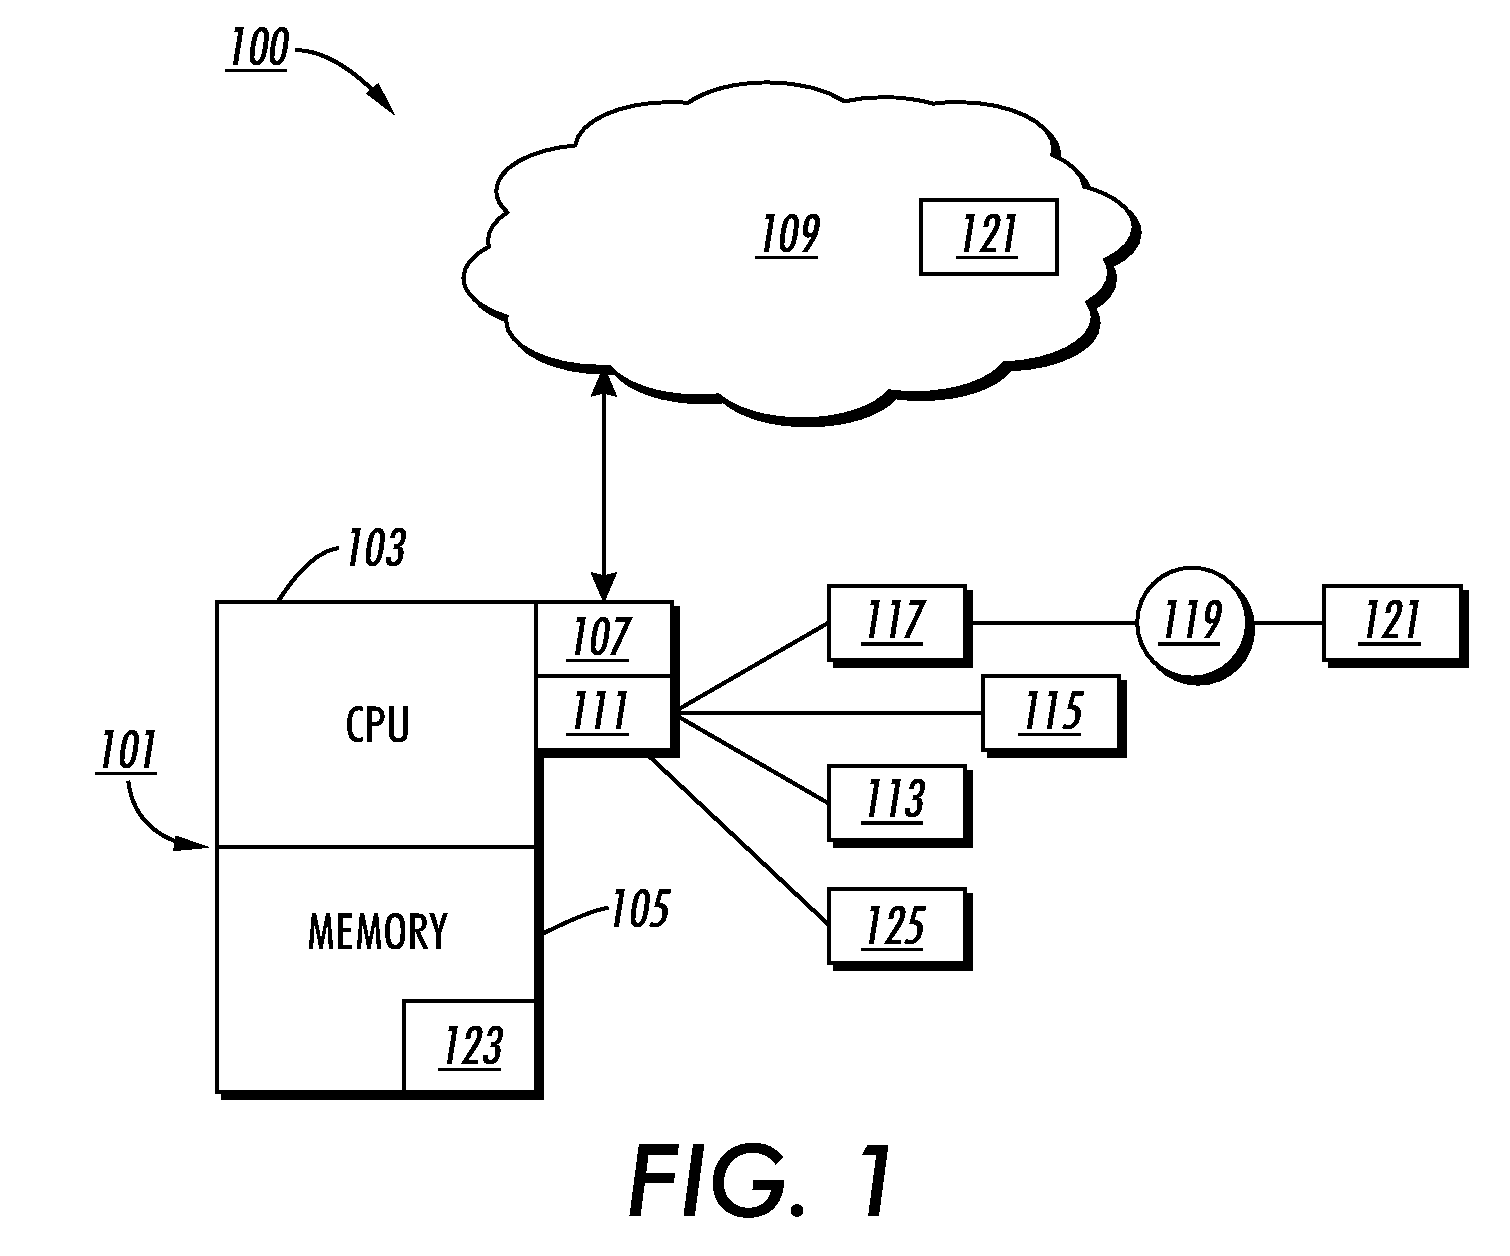 Method, apparatus, and program product for enabling access to flexibly redacted content